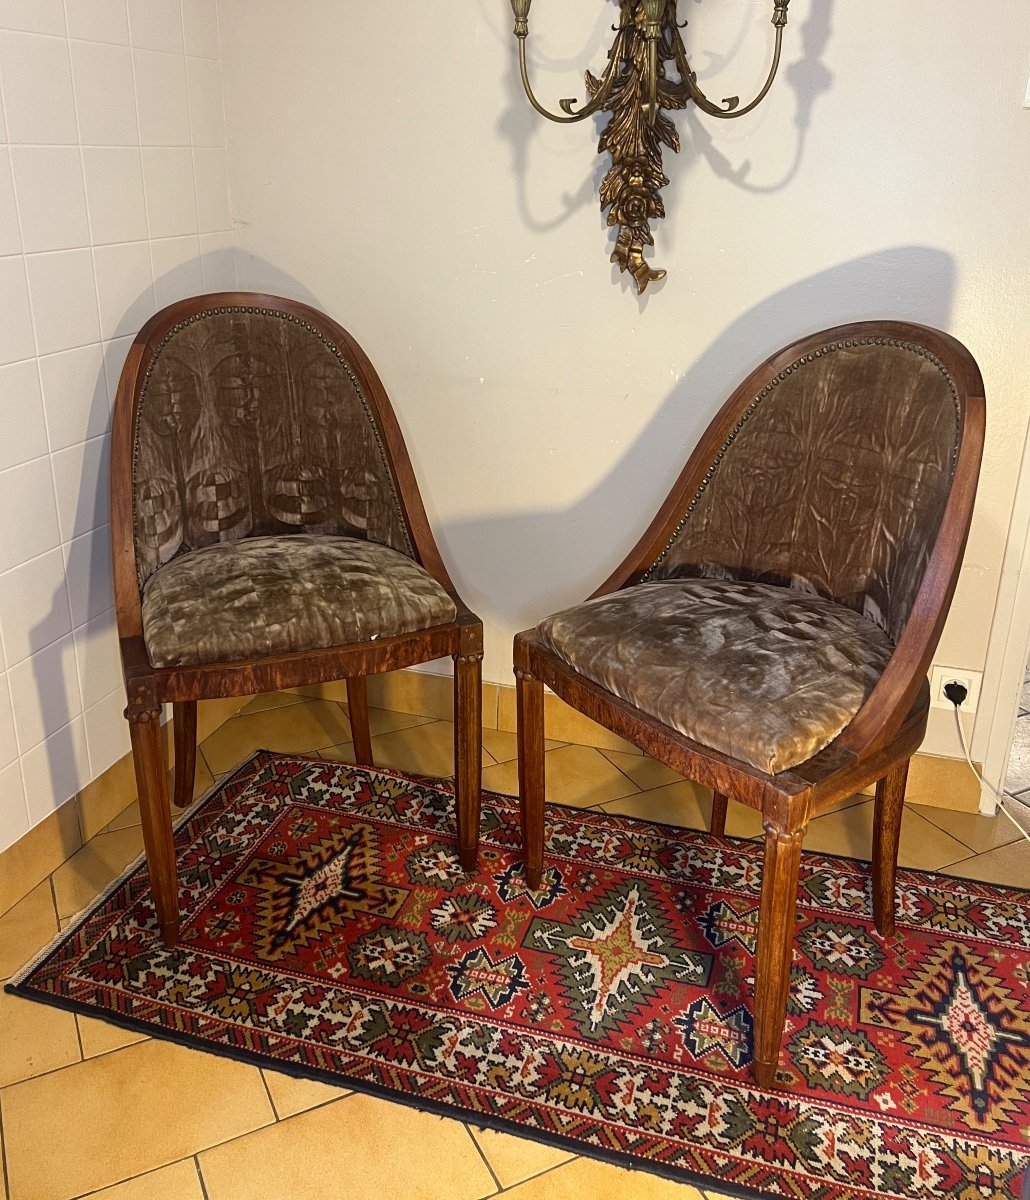 Pair Of Art Deco Chairs